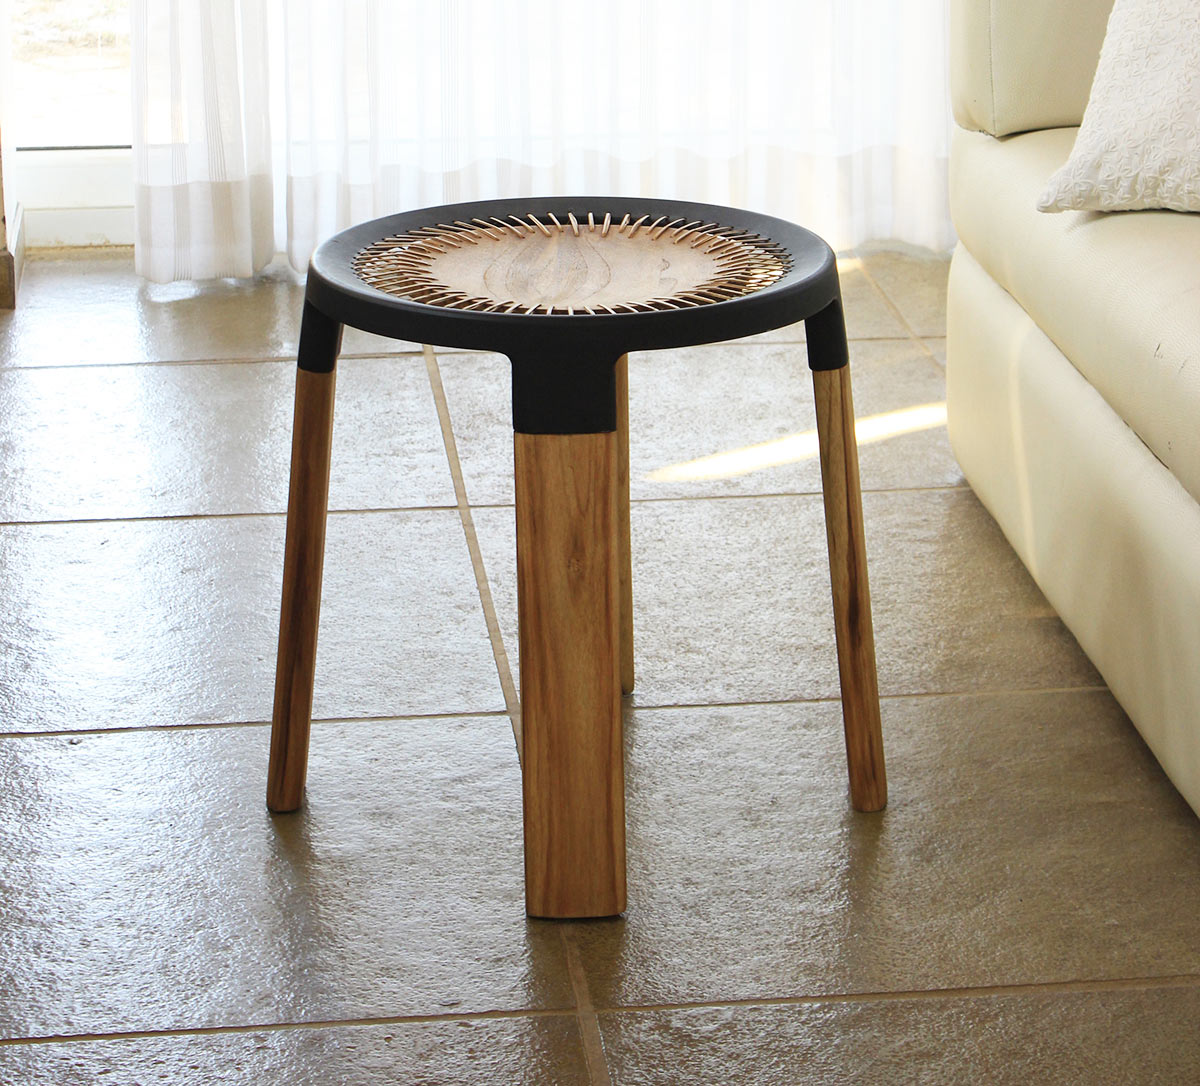 5th Column’s Ciro Wooden Stool Mixes Modern and Traditional Processes